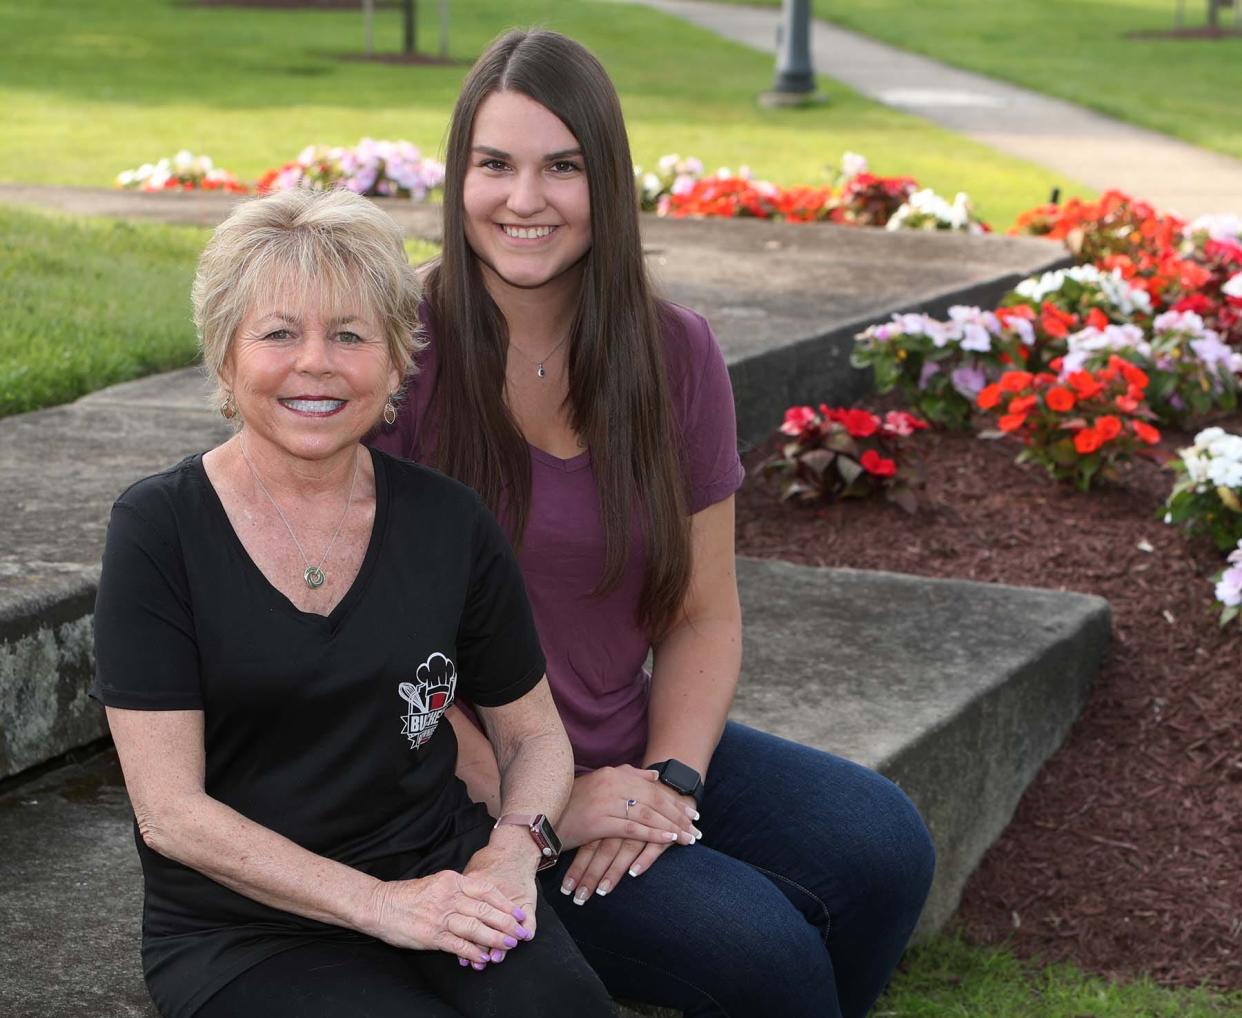 Jill Buckeye, left, and Jaylin Chadwell at the Twinsburg Township Square.  In March, Buckeye received a kidney donation from Chadwell who works in the phlebotomy lab at the Cleveland Clinic in Twinsburg where Buckeye was a patient.